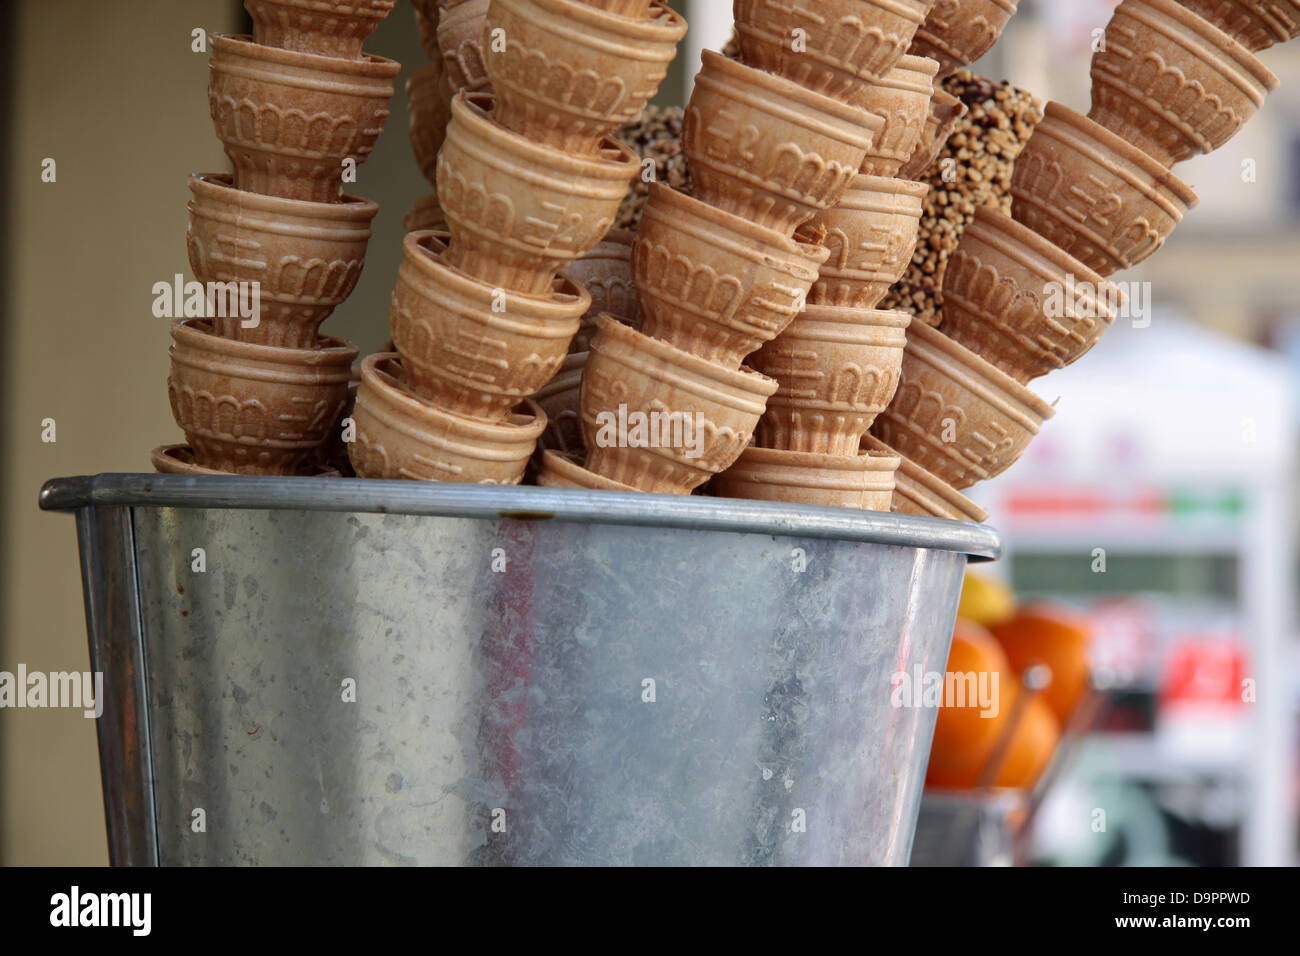 Ice cream cones stacked in an ice cream shop in Florence Stock Photo